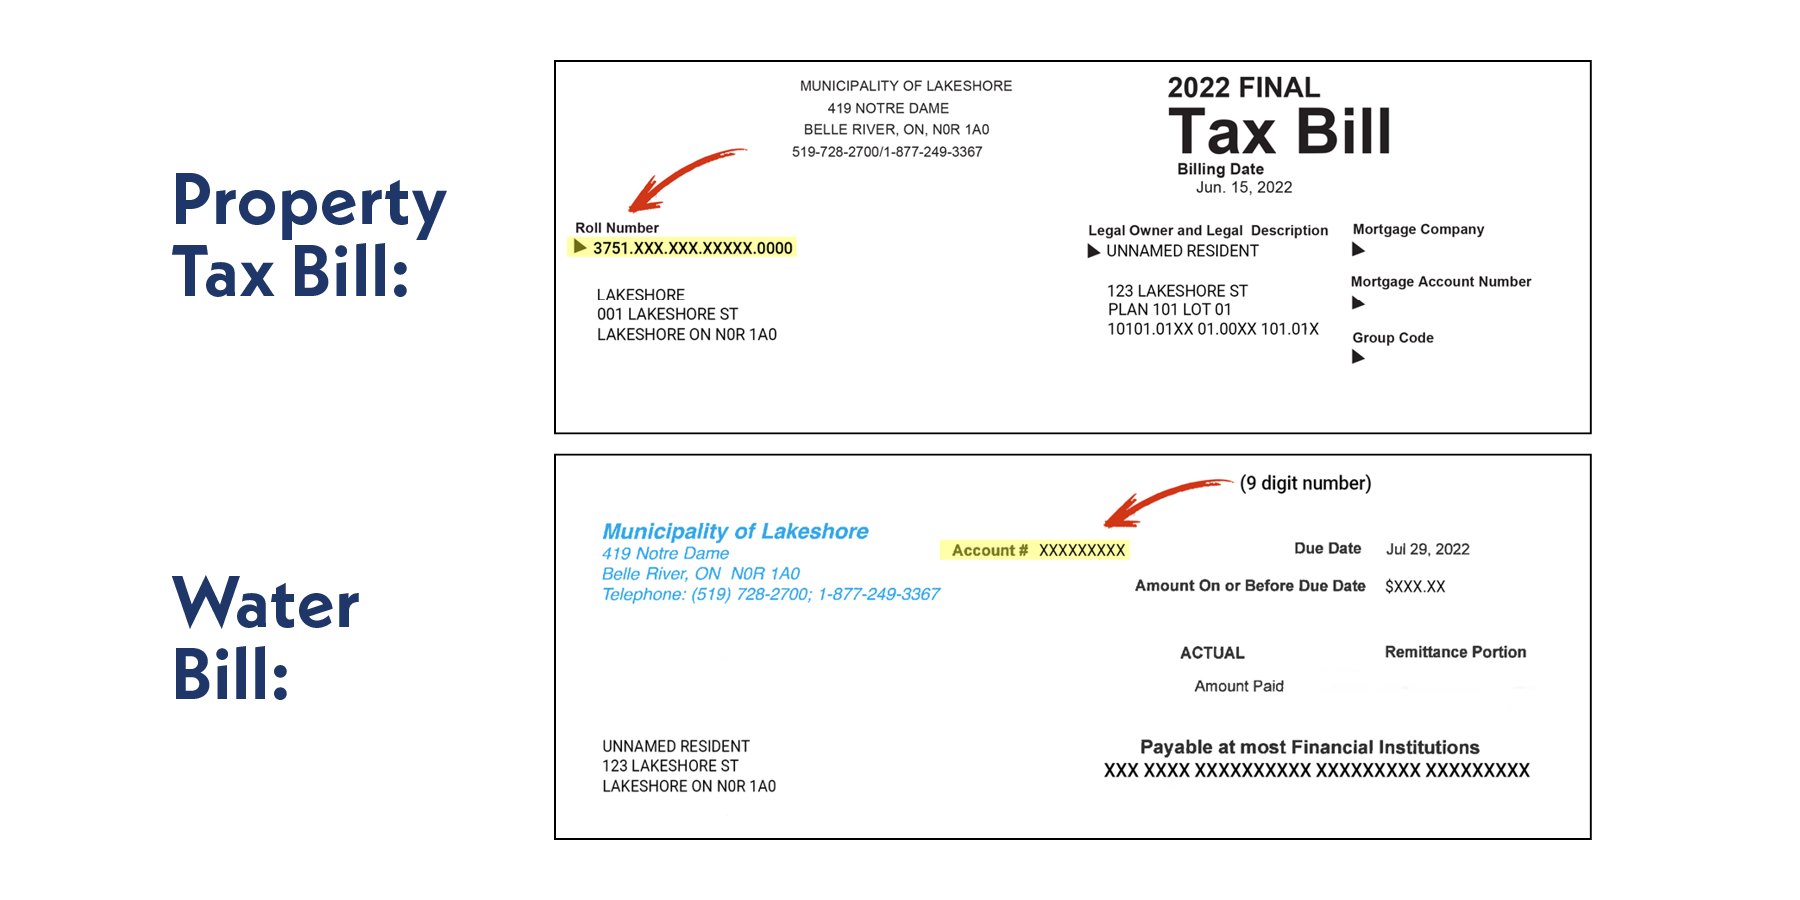 Screen capture of example property tax and water bill invoices.